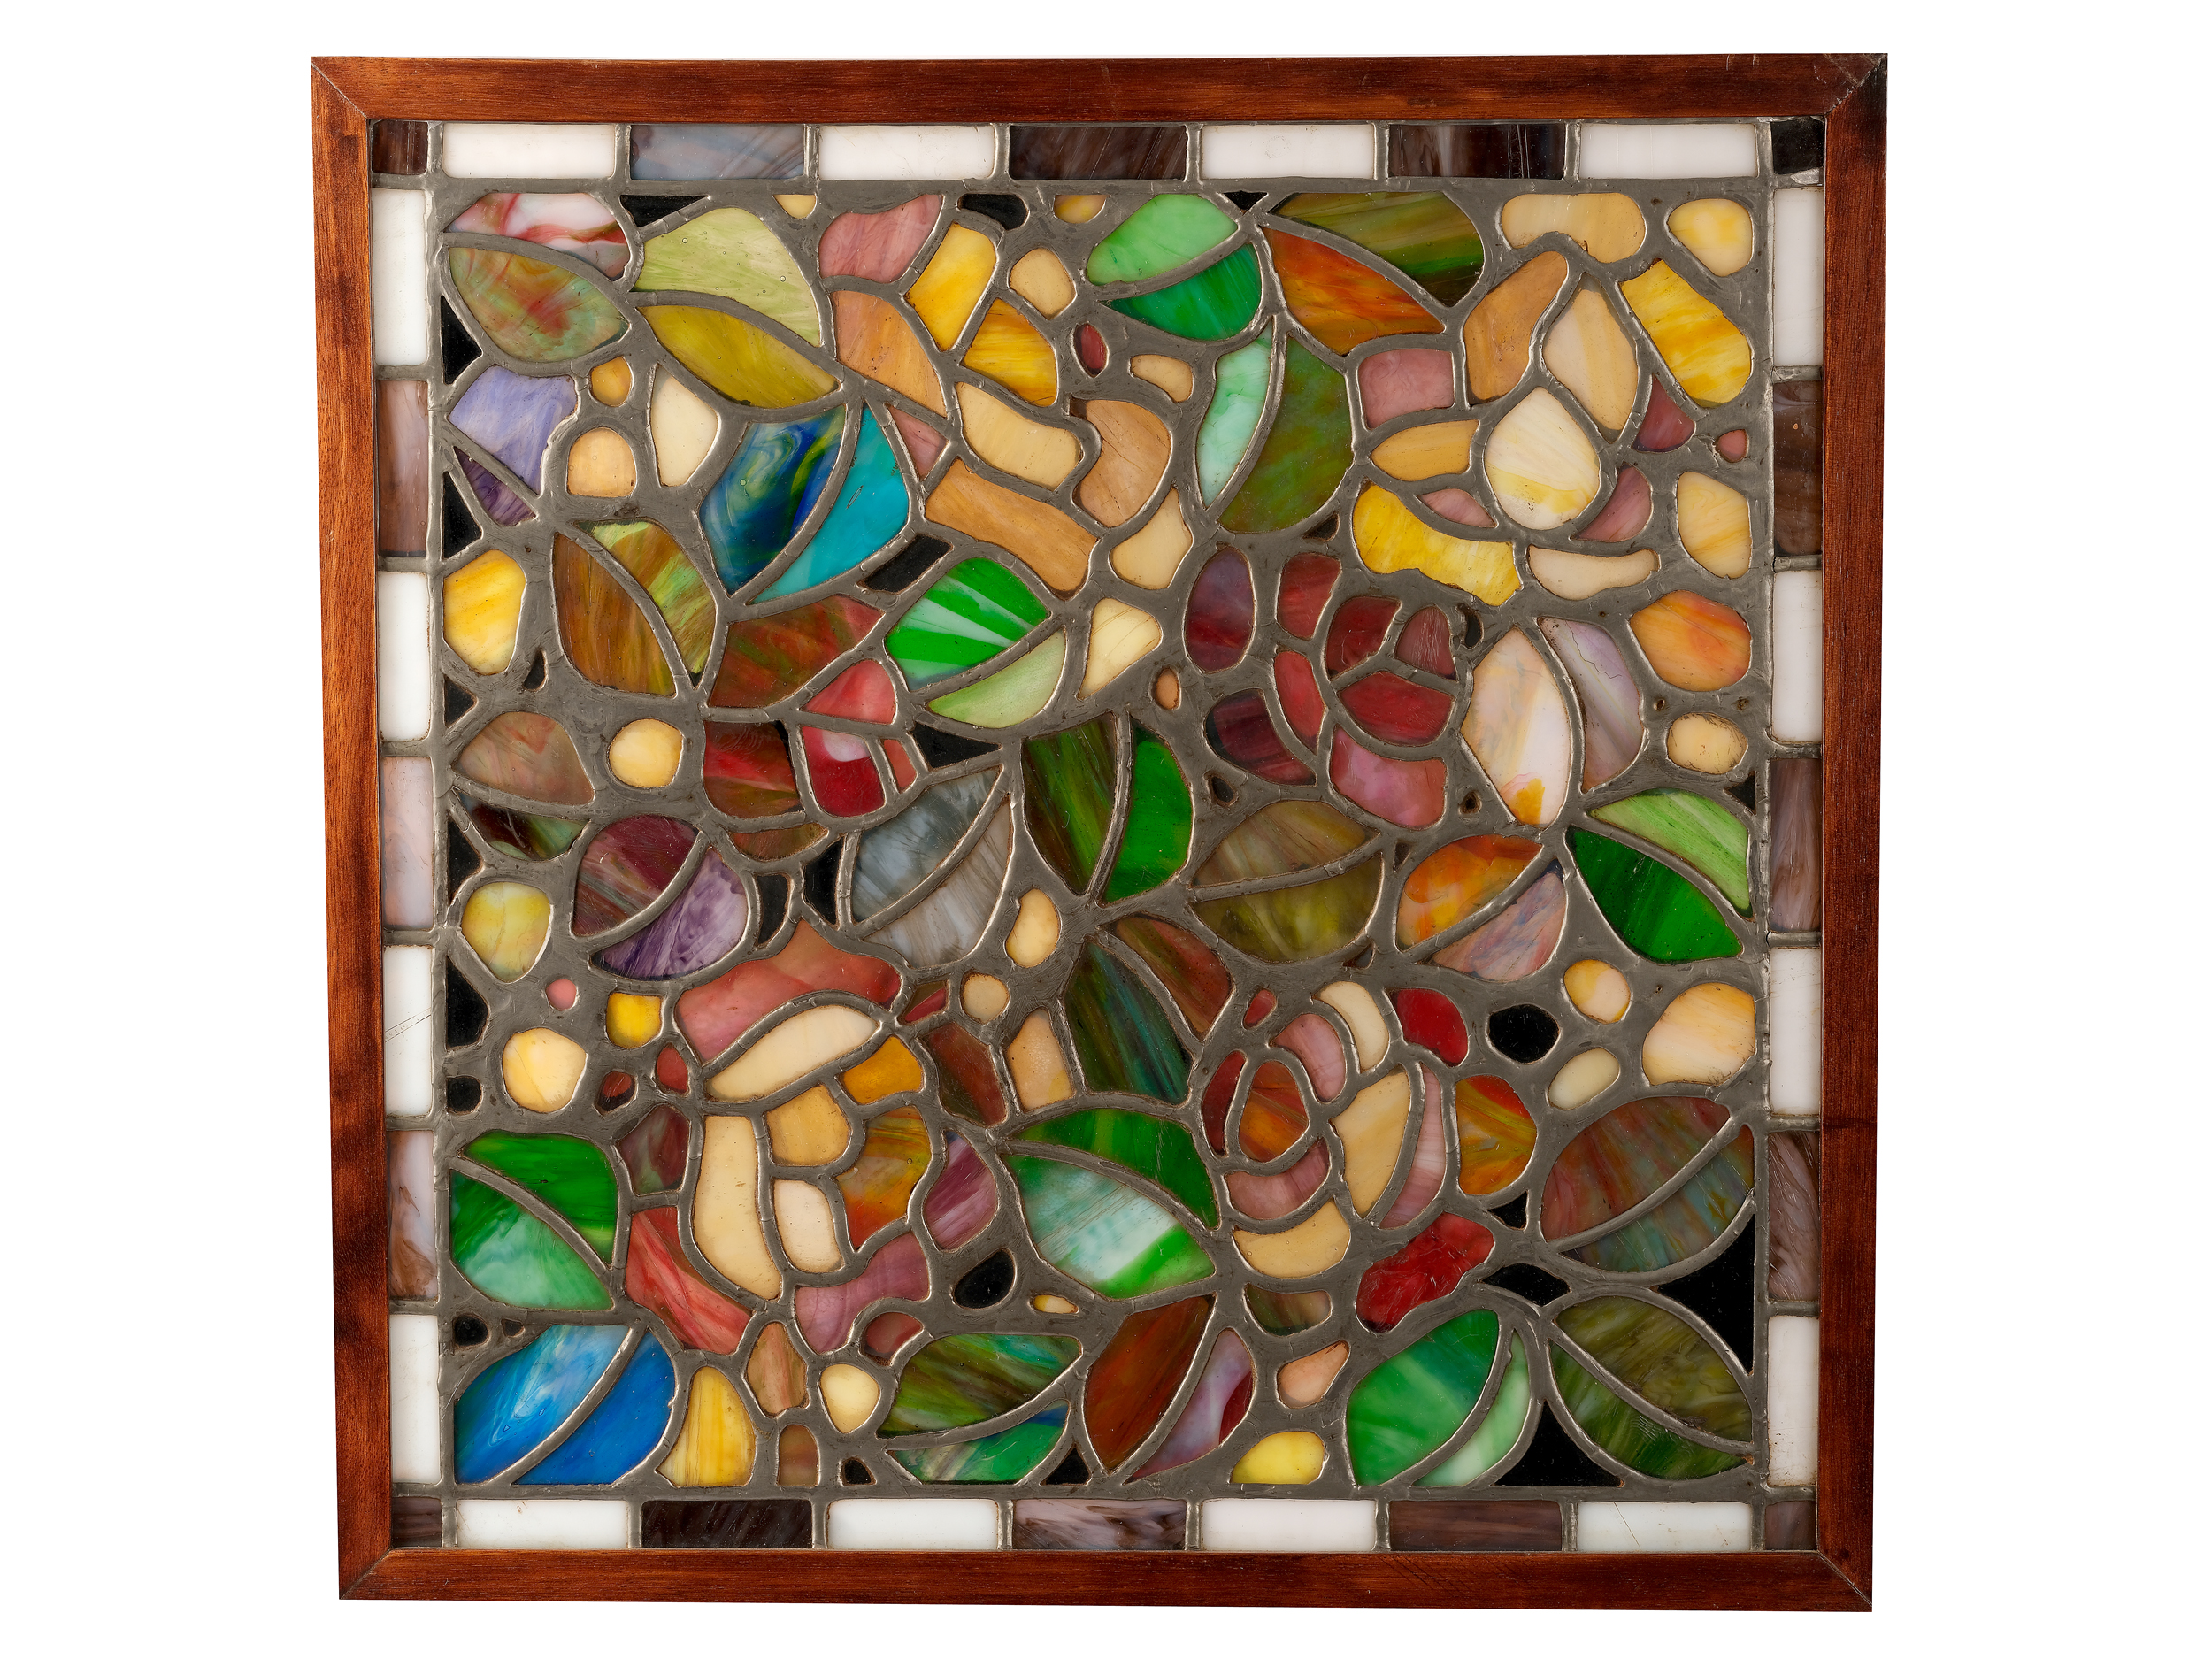 Art Nouveau window, Around 1900/20, Colorful leaded glass in wooden frame